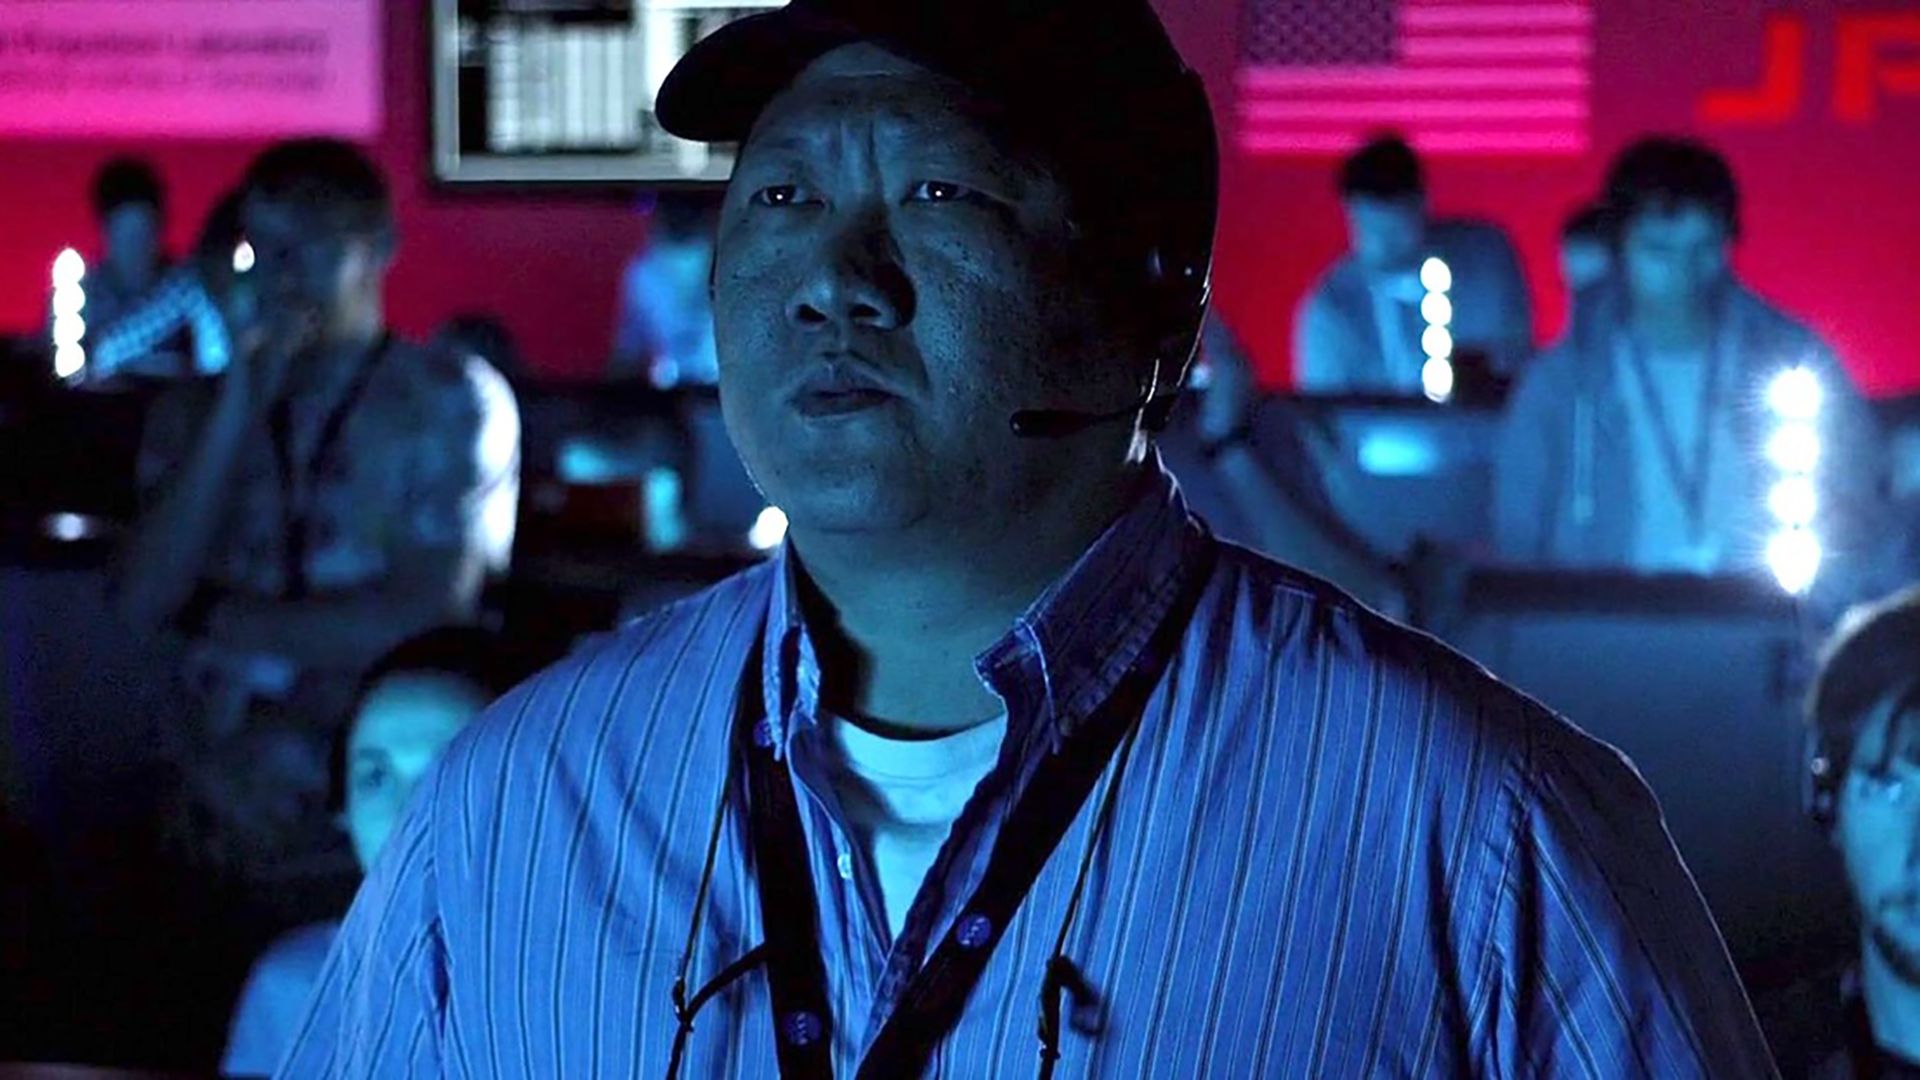 Benedict Wong in the movie The Martian